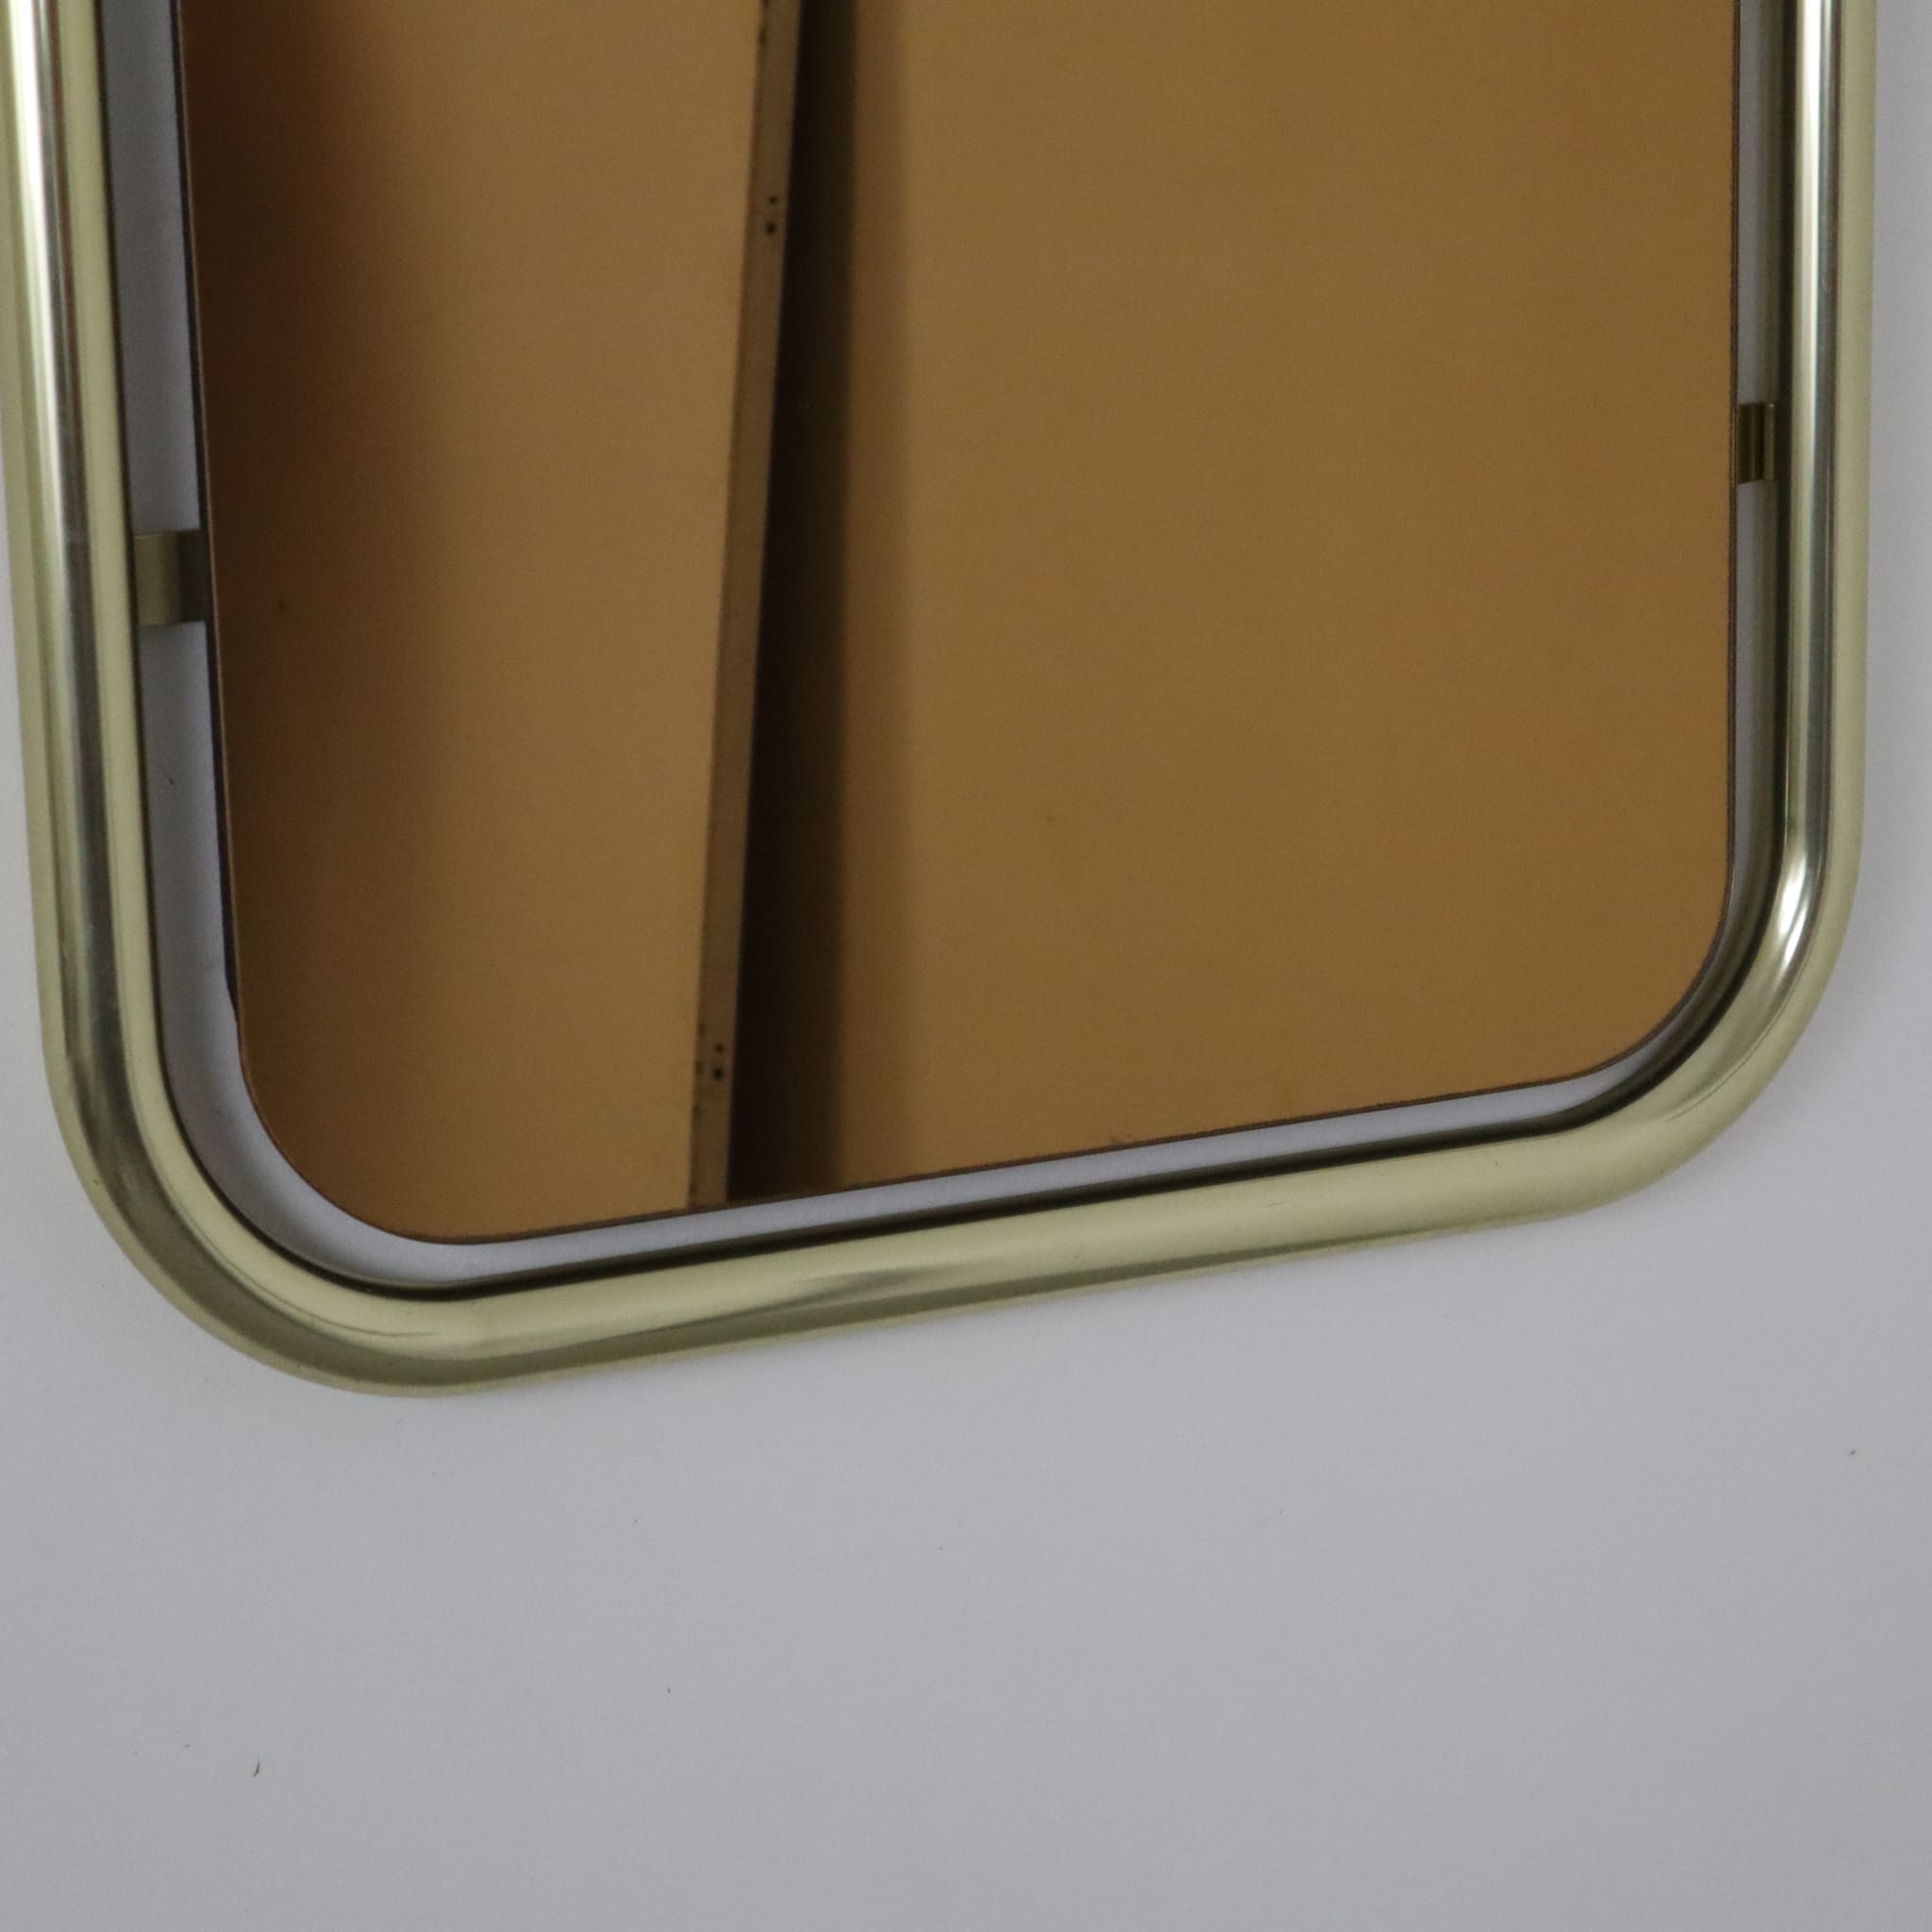 visionidepoca-modern-mirror-70s-frame-in-brass-plated-aluminium-and-bronzed-mirror-vintage-made-in-italy-detail-of-lower-frame